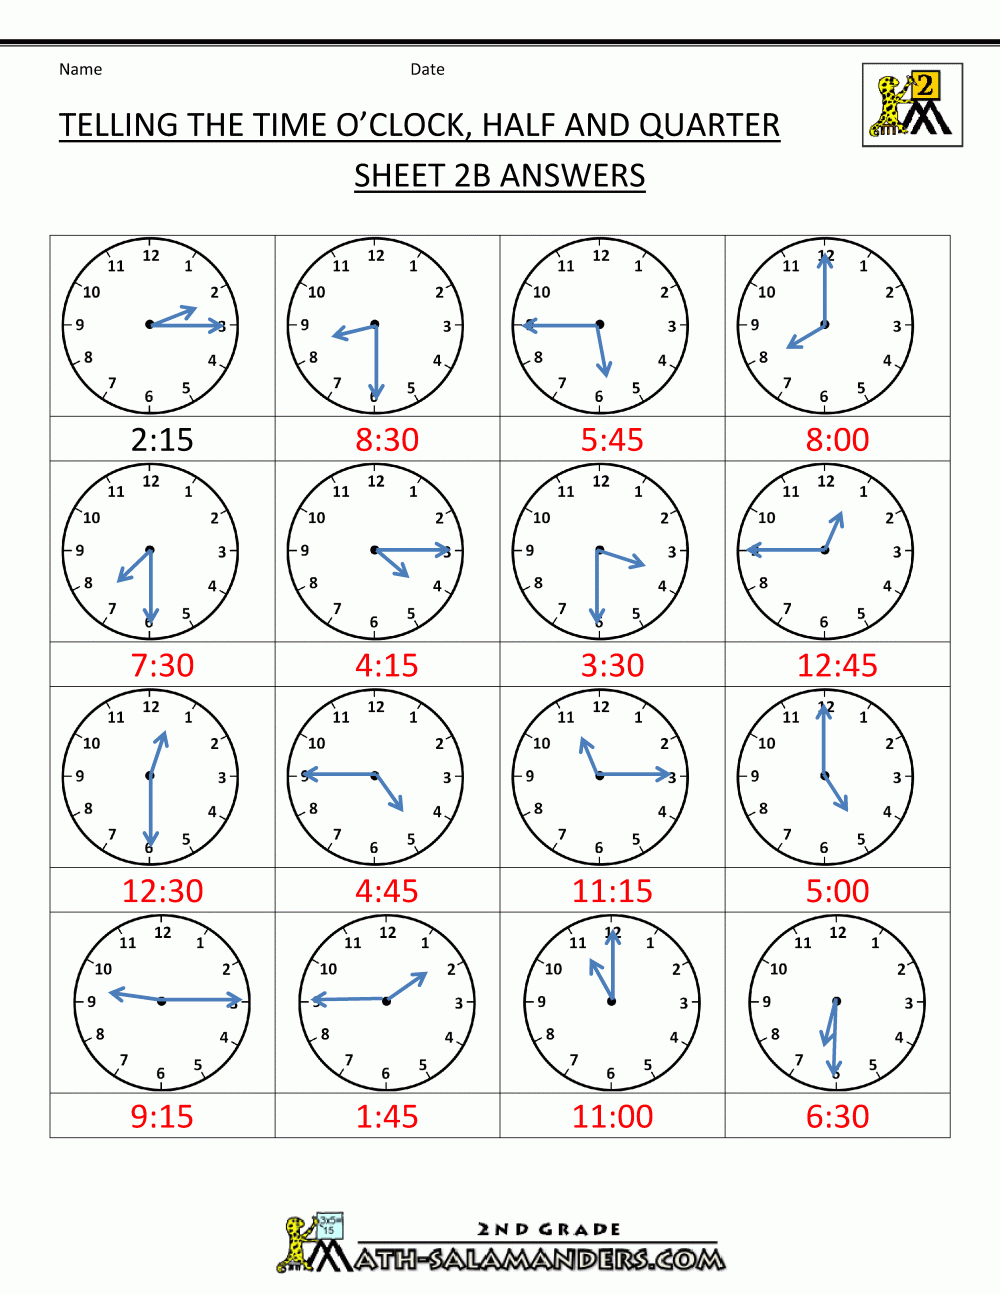 learning-to-tell-the-time-worksheets-db-excel